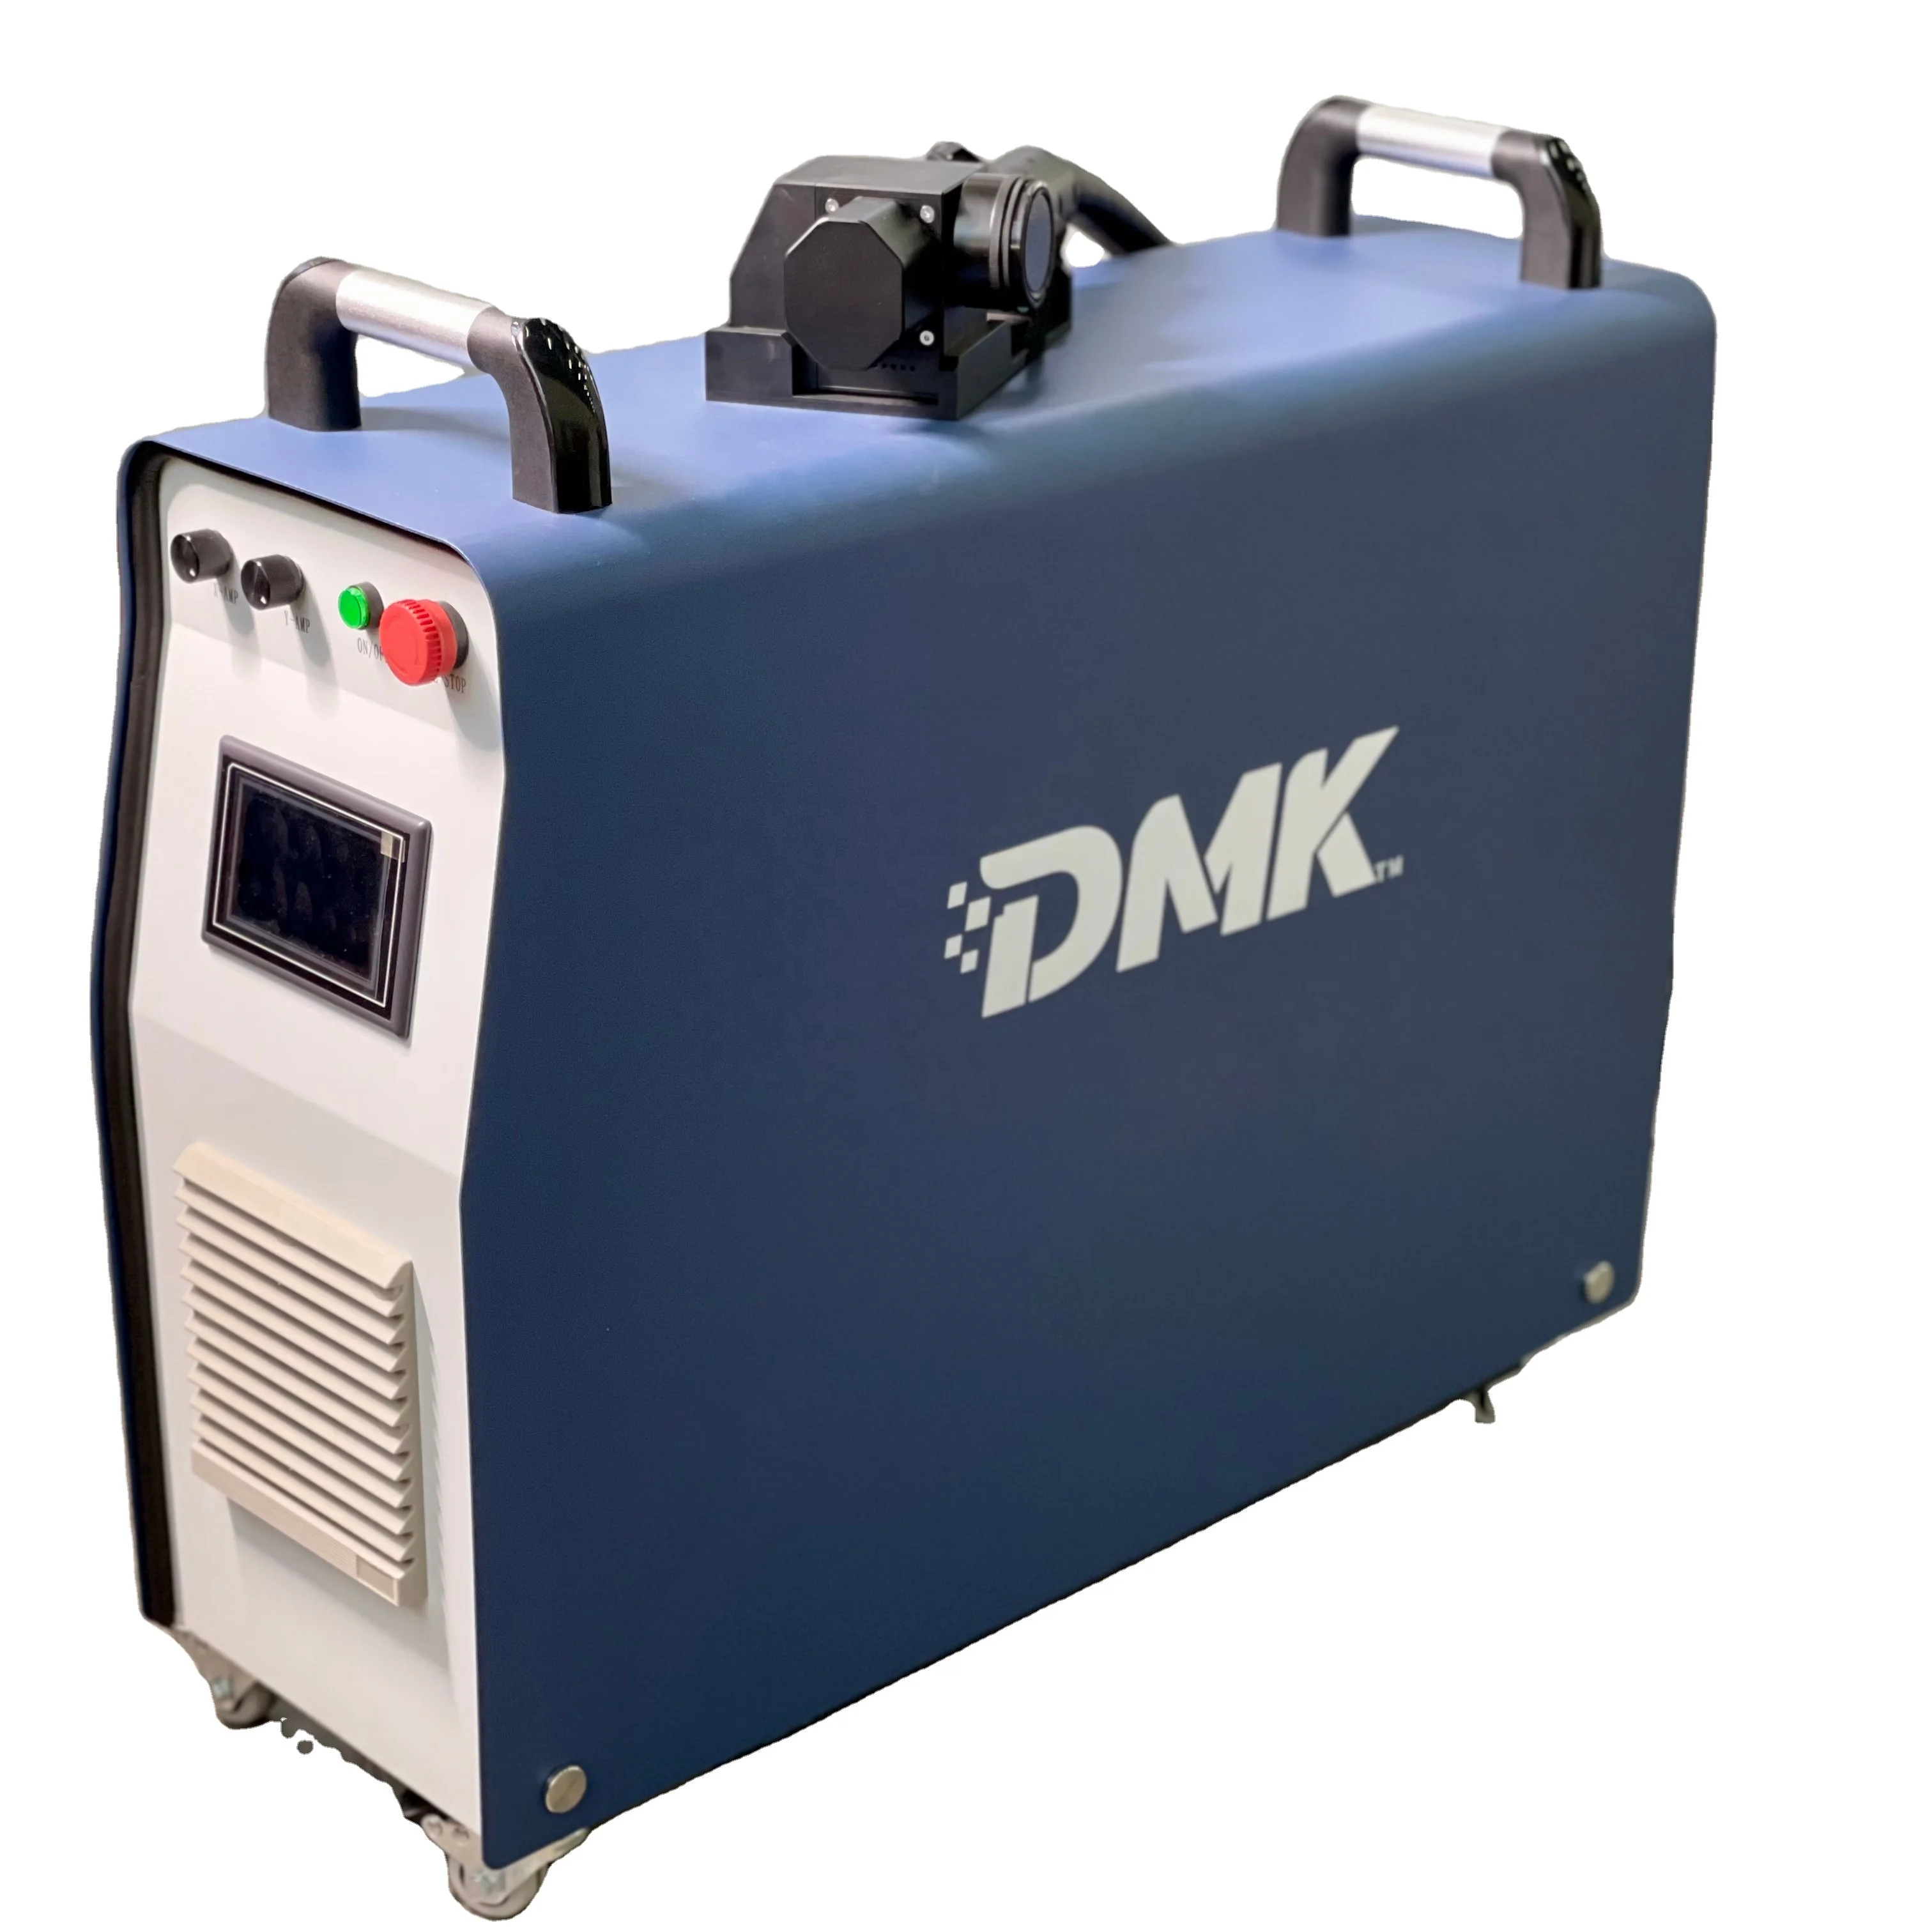 

200W air-cooled DMK Pulsed Fiber Laser Cleaning Machine Rust Removal Brick Oil Coating Paint Cleaner Lazer Cleaning Tools